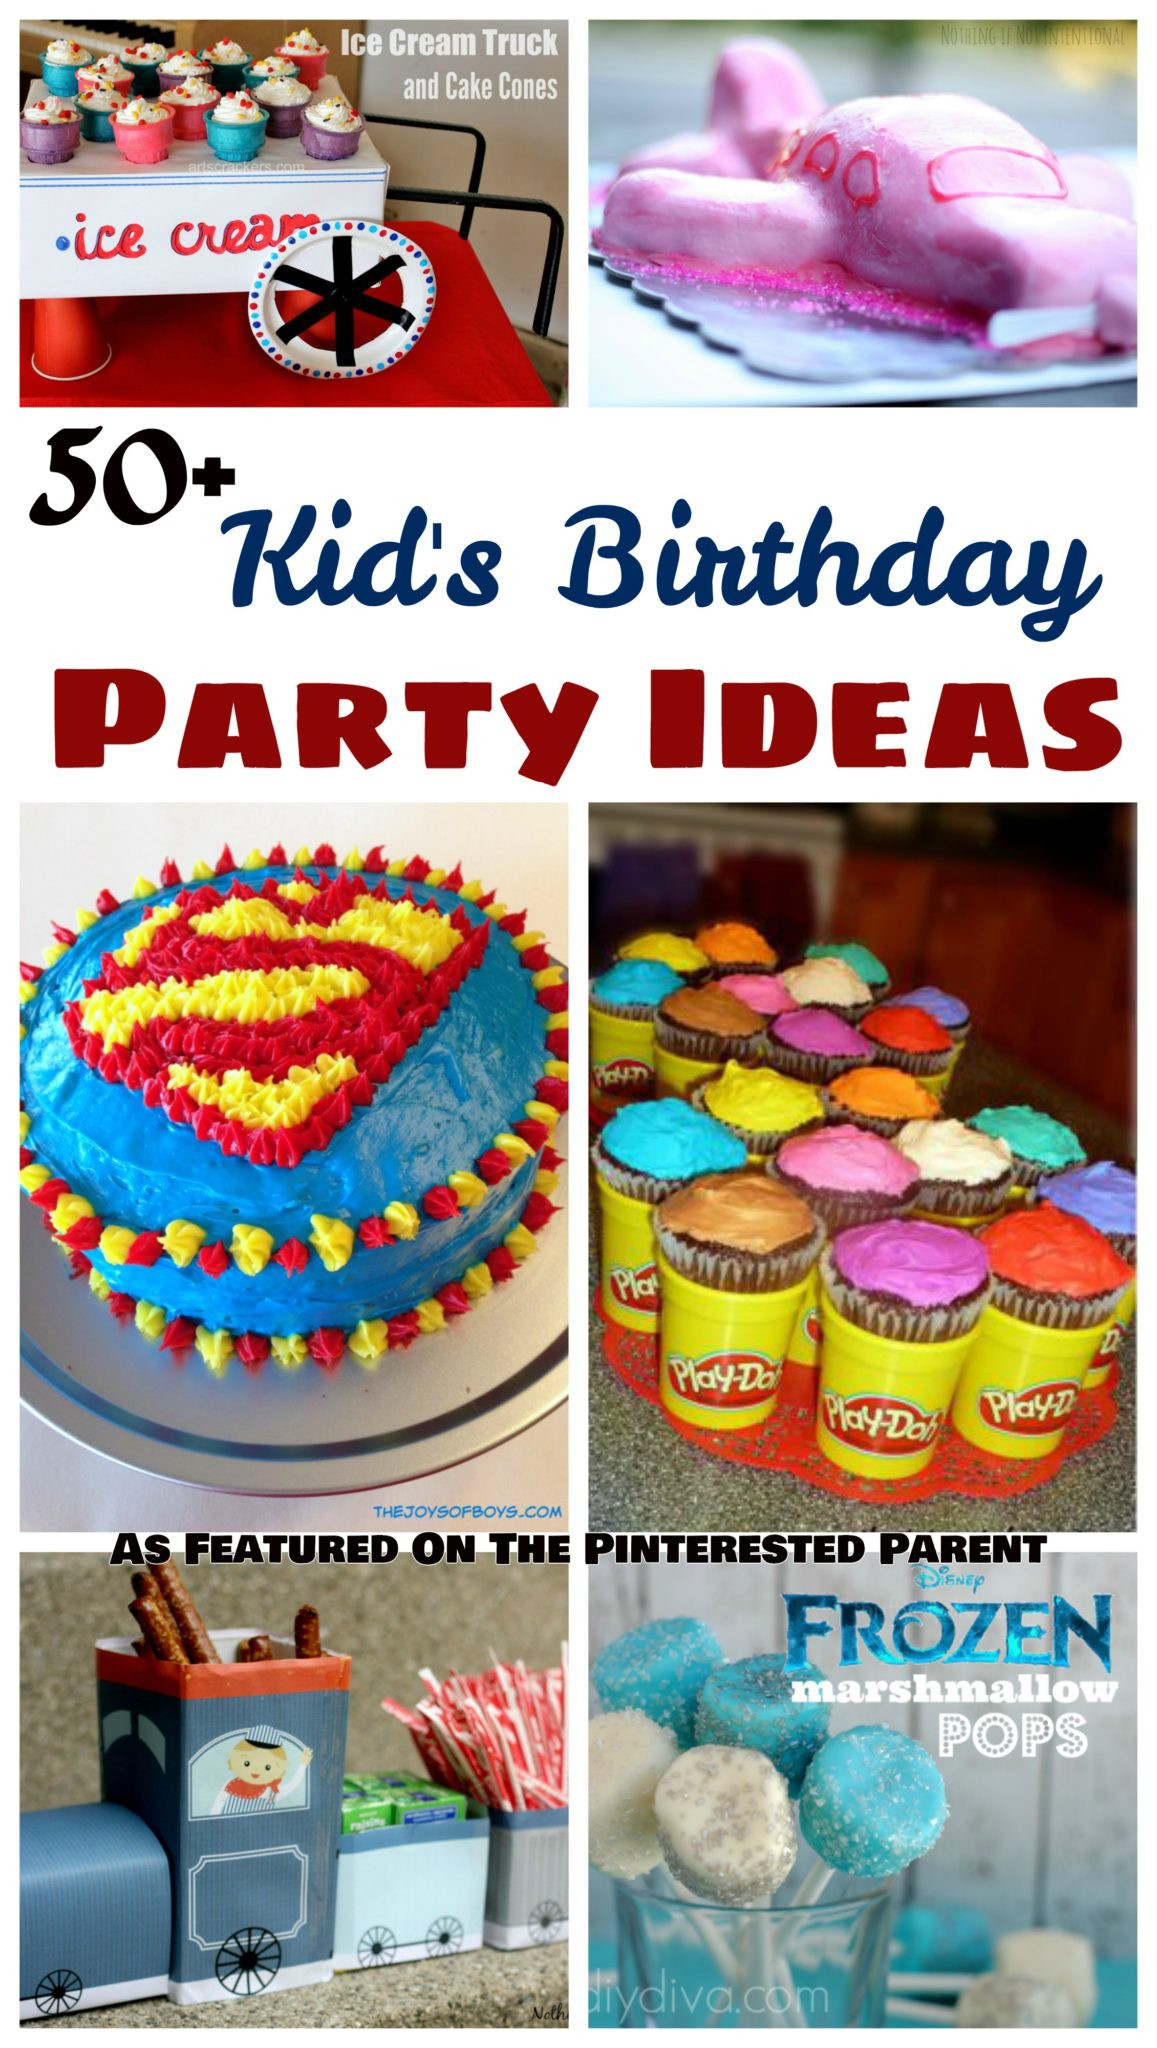 Party Ideas For Kids
 50 Kid s Birthday Party Ideas – The Pinterested Parent